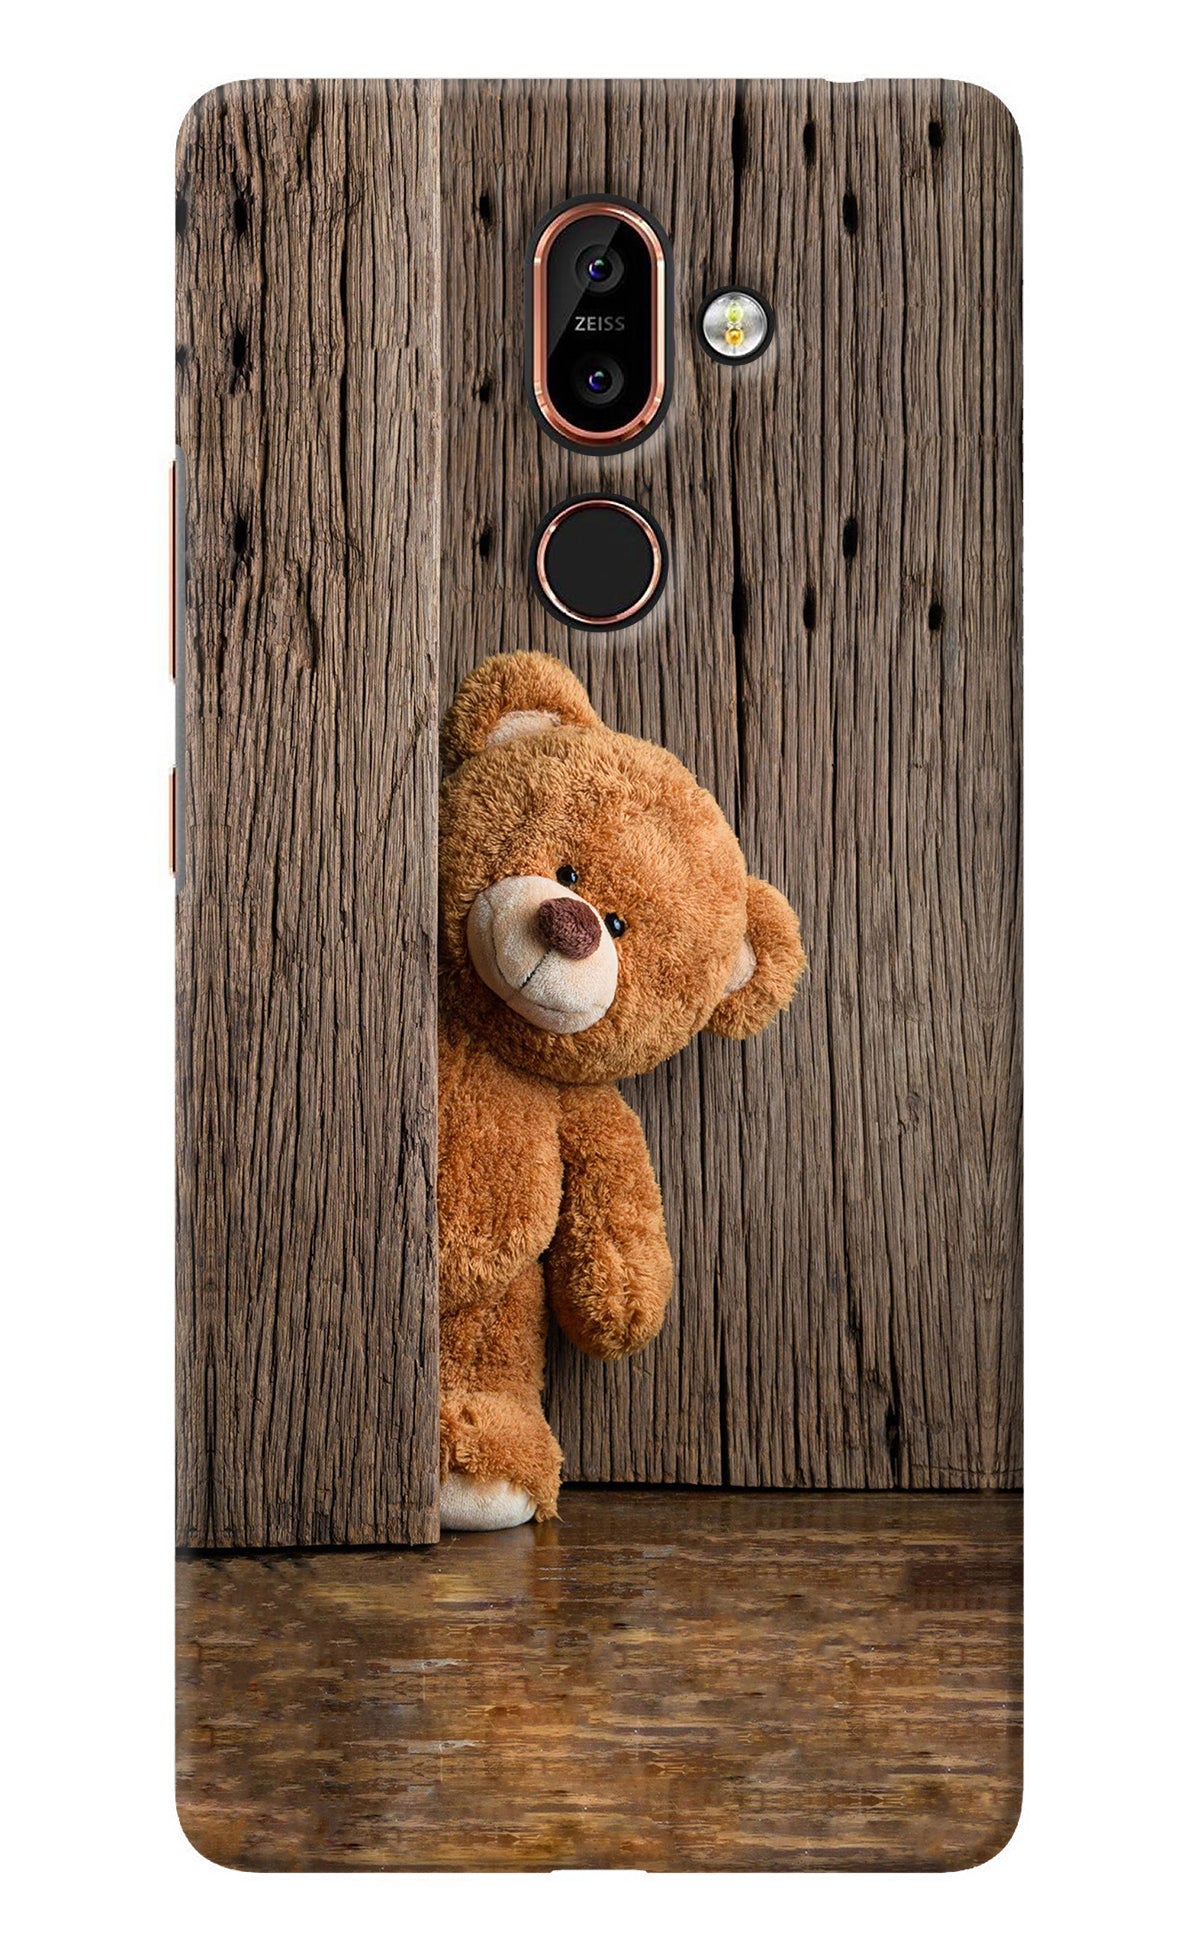 Teddy Wooden Nokia 7 Plus Back Cover